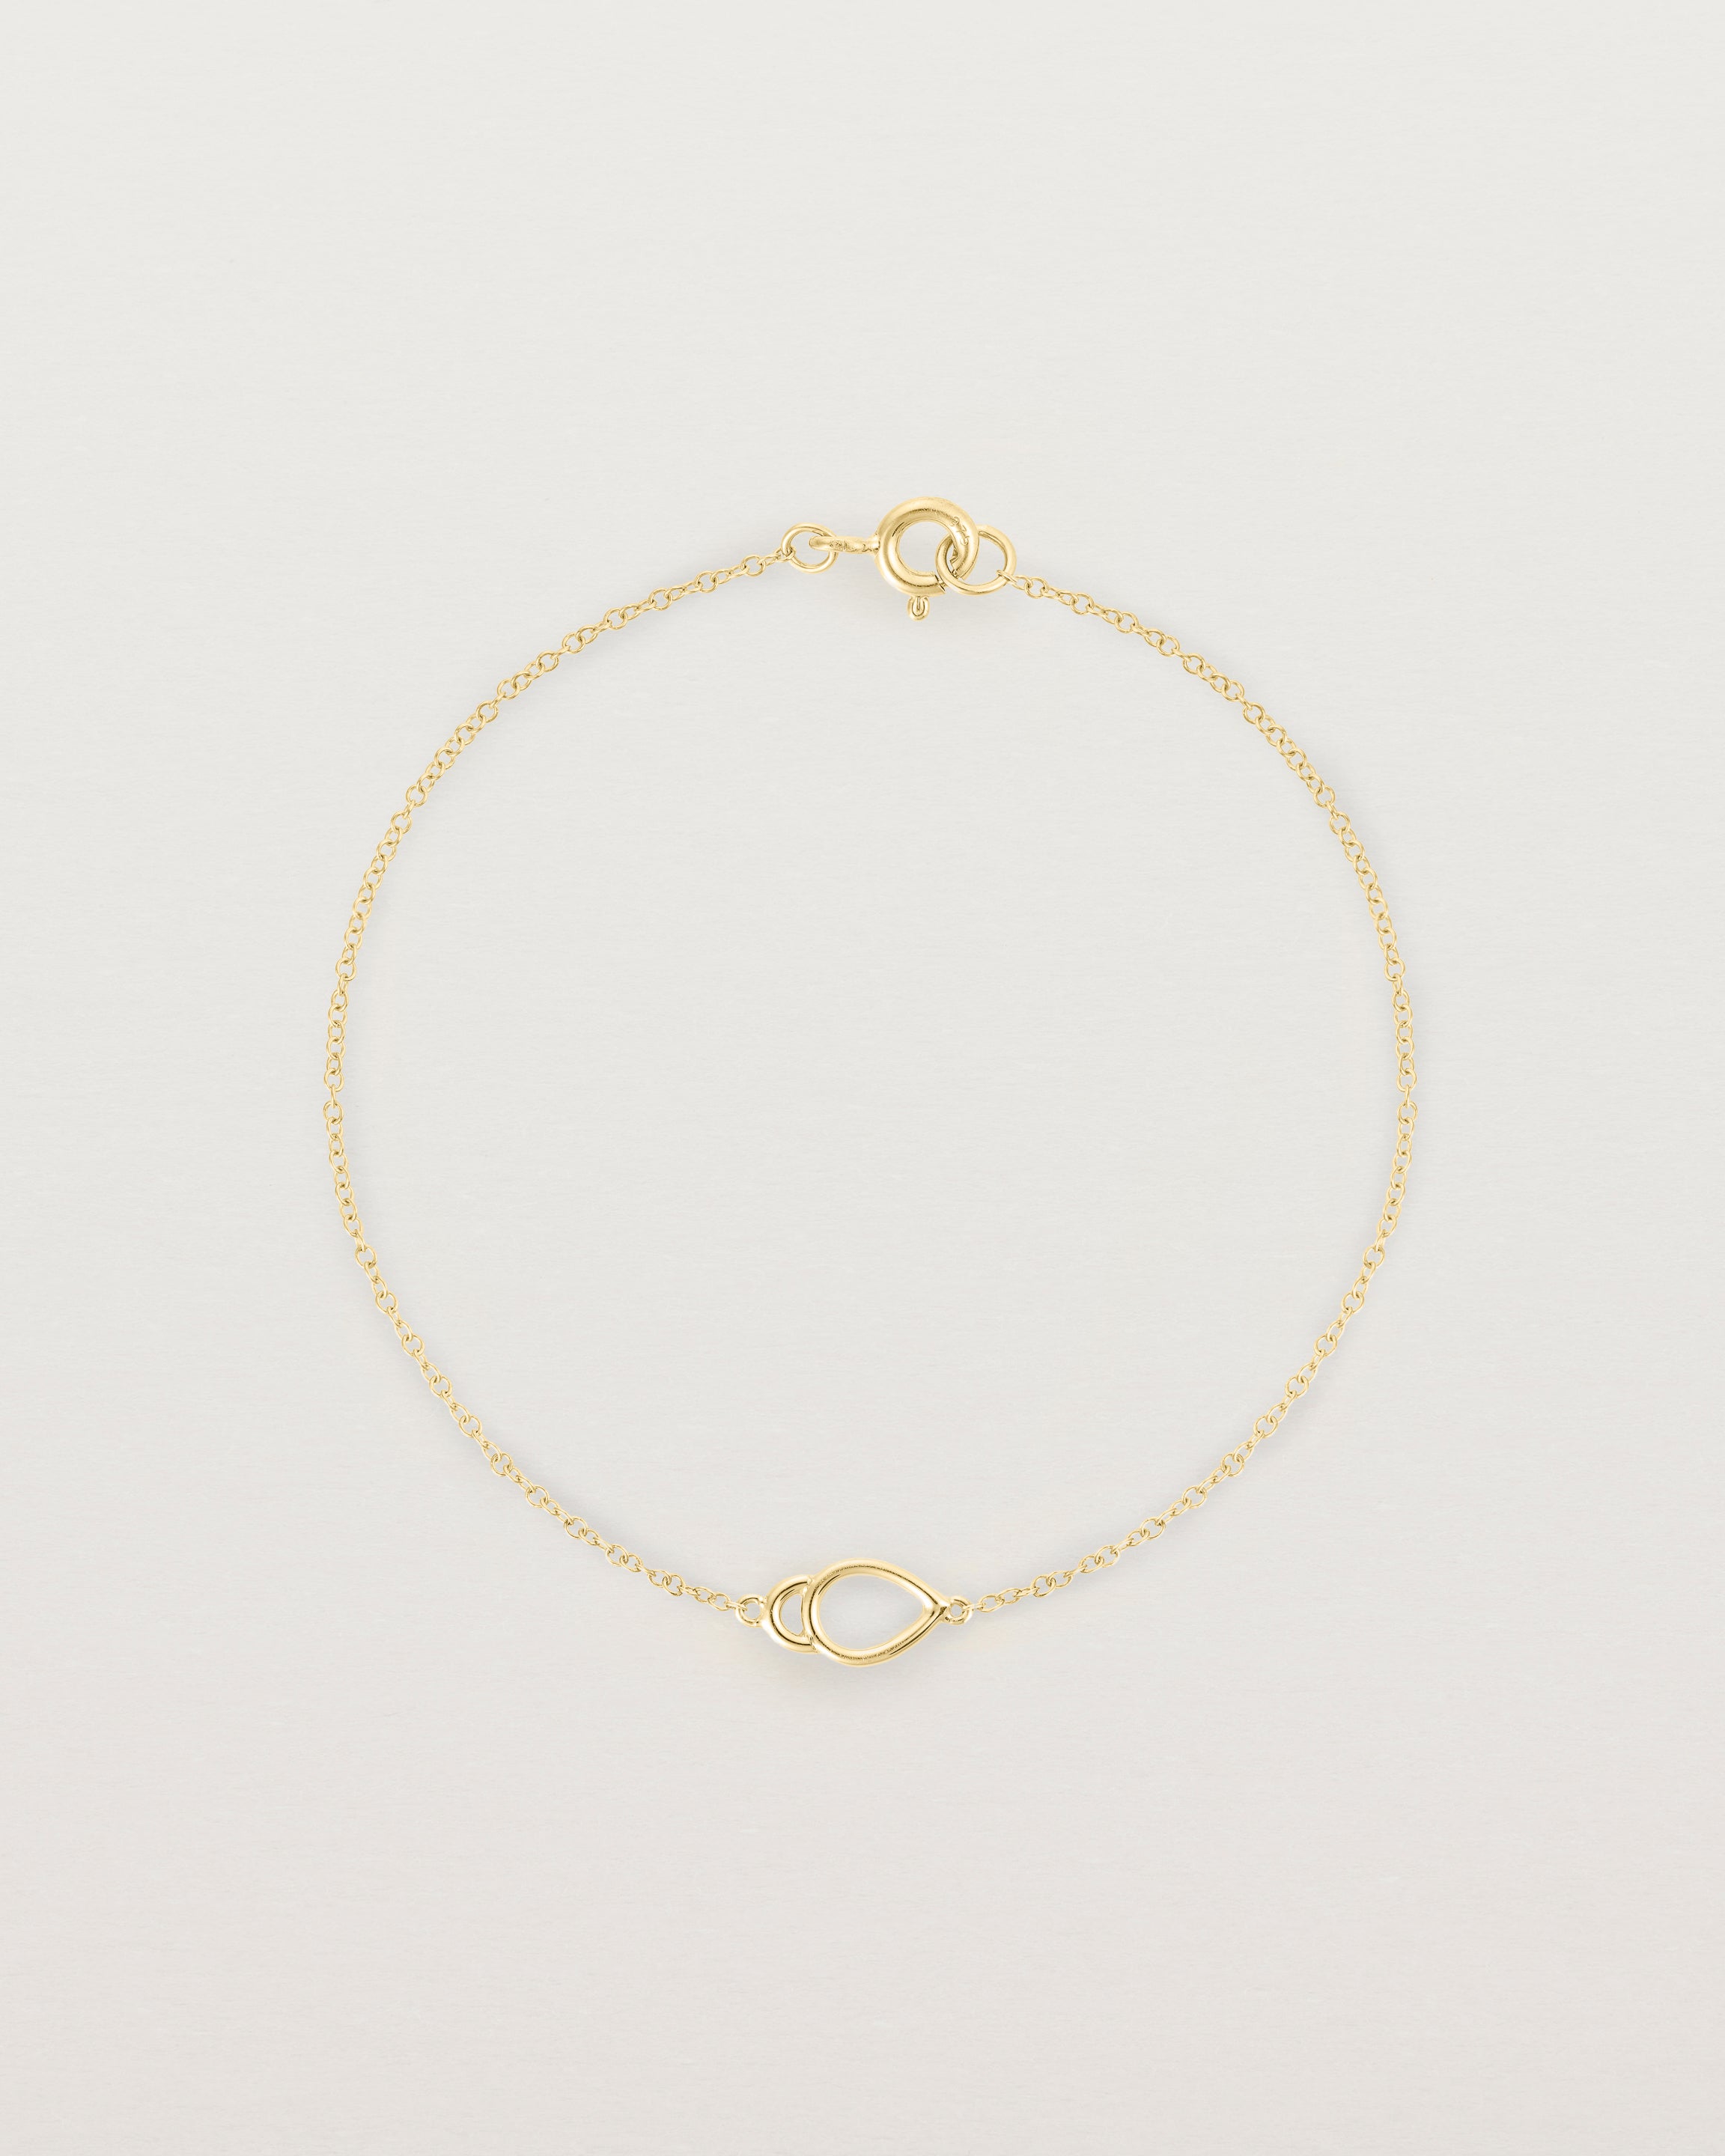 A yellow gold chain with an oval pendant